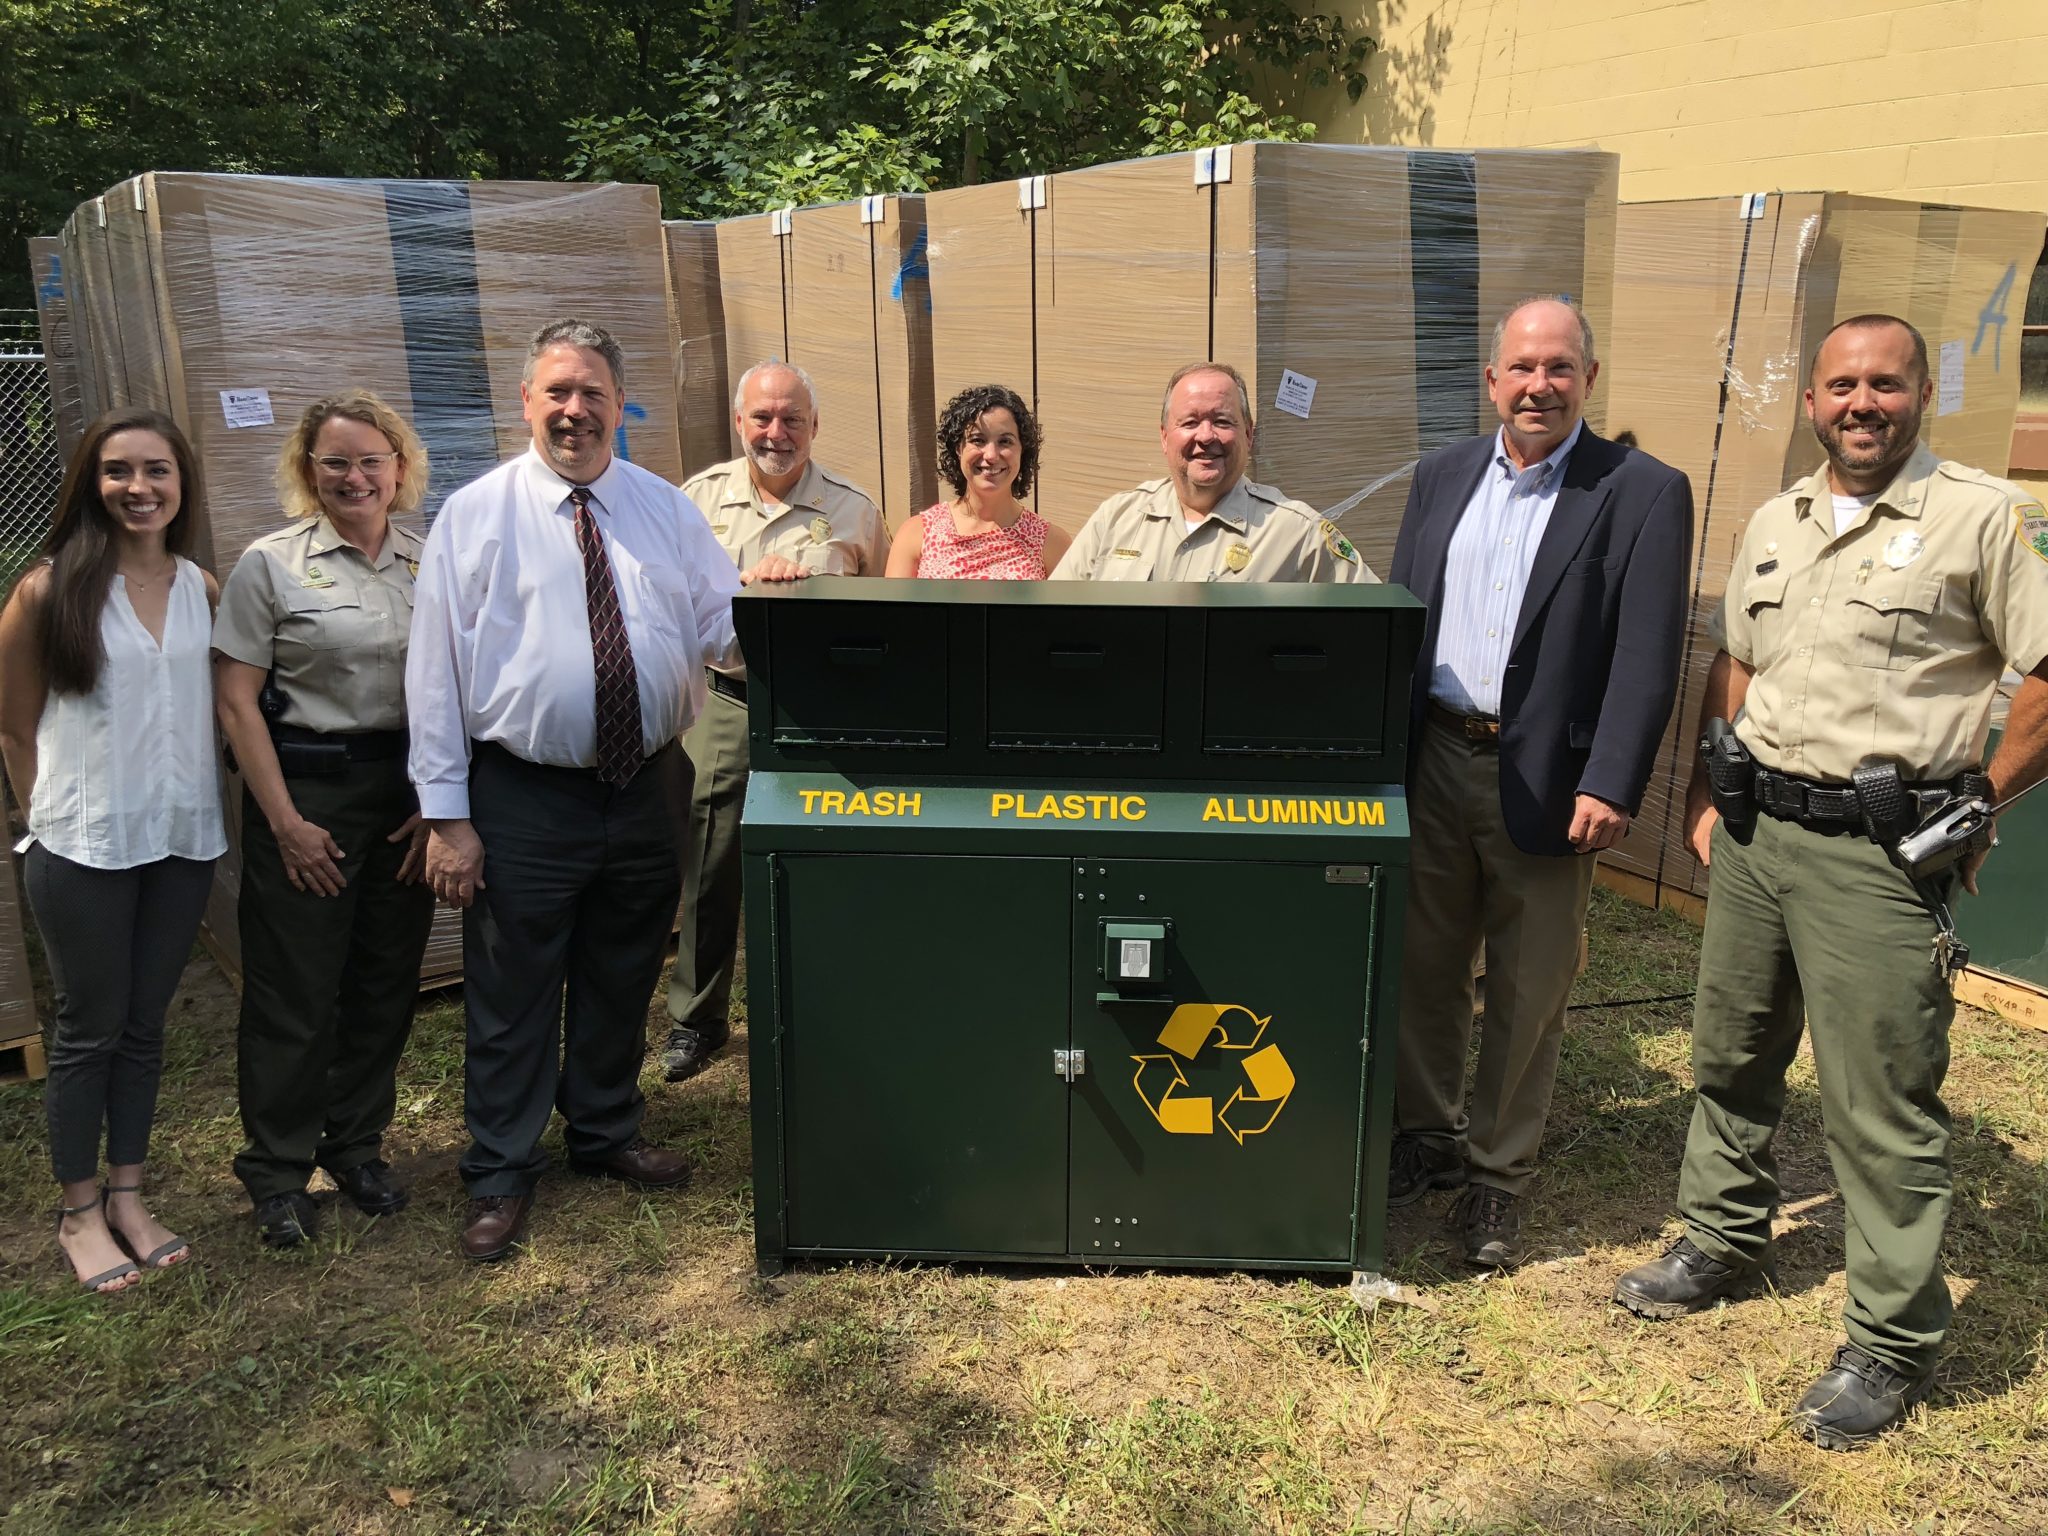 Tennessee State Parks Offers More Recycling Options for Visitors - Visitors at Tennessee State Parks now have more recycling options thanks to new bins delivered this month to all 56 parks. Pictured L-R: Kelsey Davis; Robin Peeler, Tennessee State Parks Area Manager; Larry Christley; Pat Wright, Montgomery Bell State Park Manager; Dr. Kendra Abkowitz Brooks, TDEC assistant commissioner; Mike Robertson, Tennessee State Parks Director of Operations; Brock Hill; Scott Ferguson, Montgomery Bell State Park Ranger